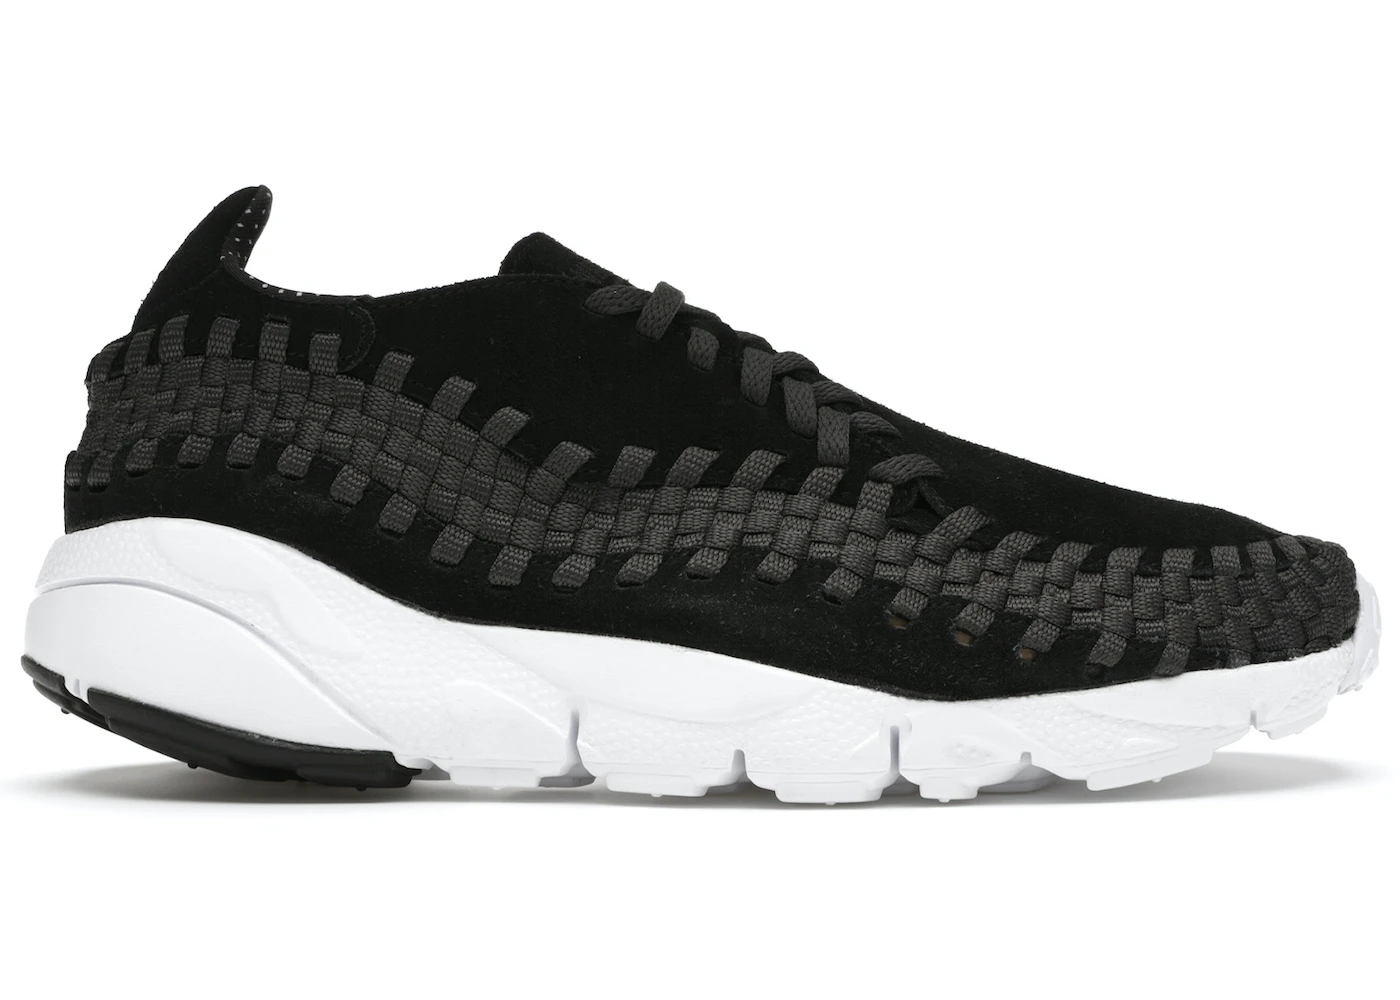 Nike Air Footscape Woven NM Black Anthracite Men's - 875797-001 - US